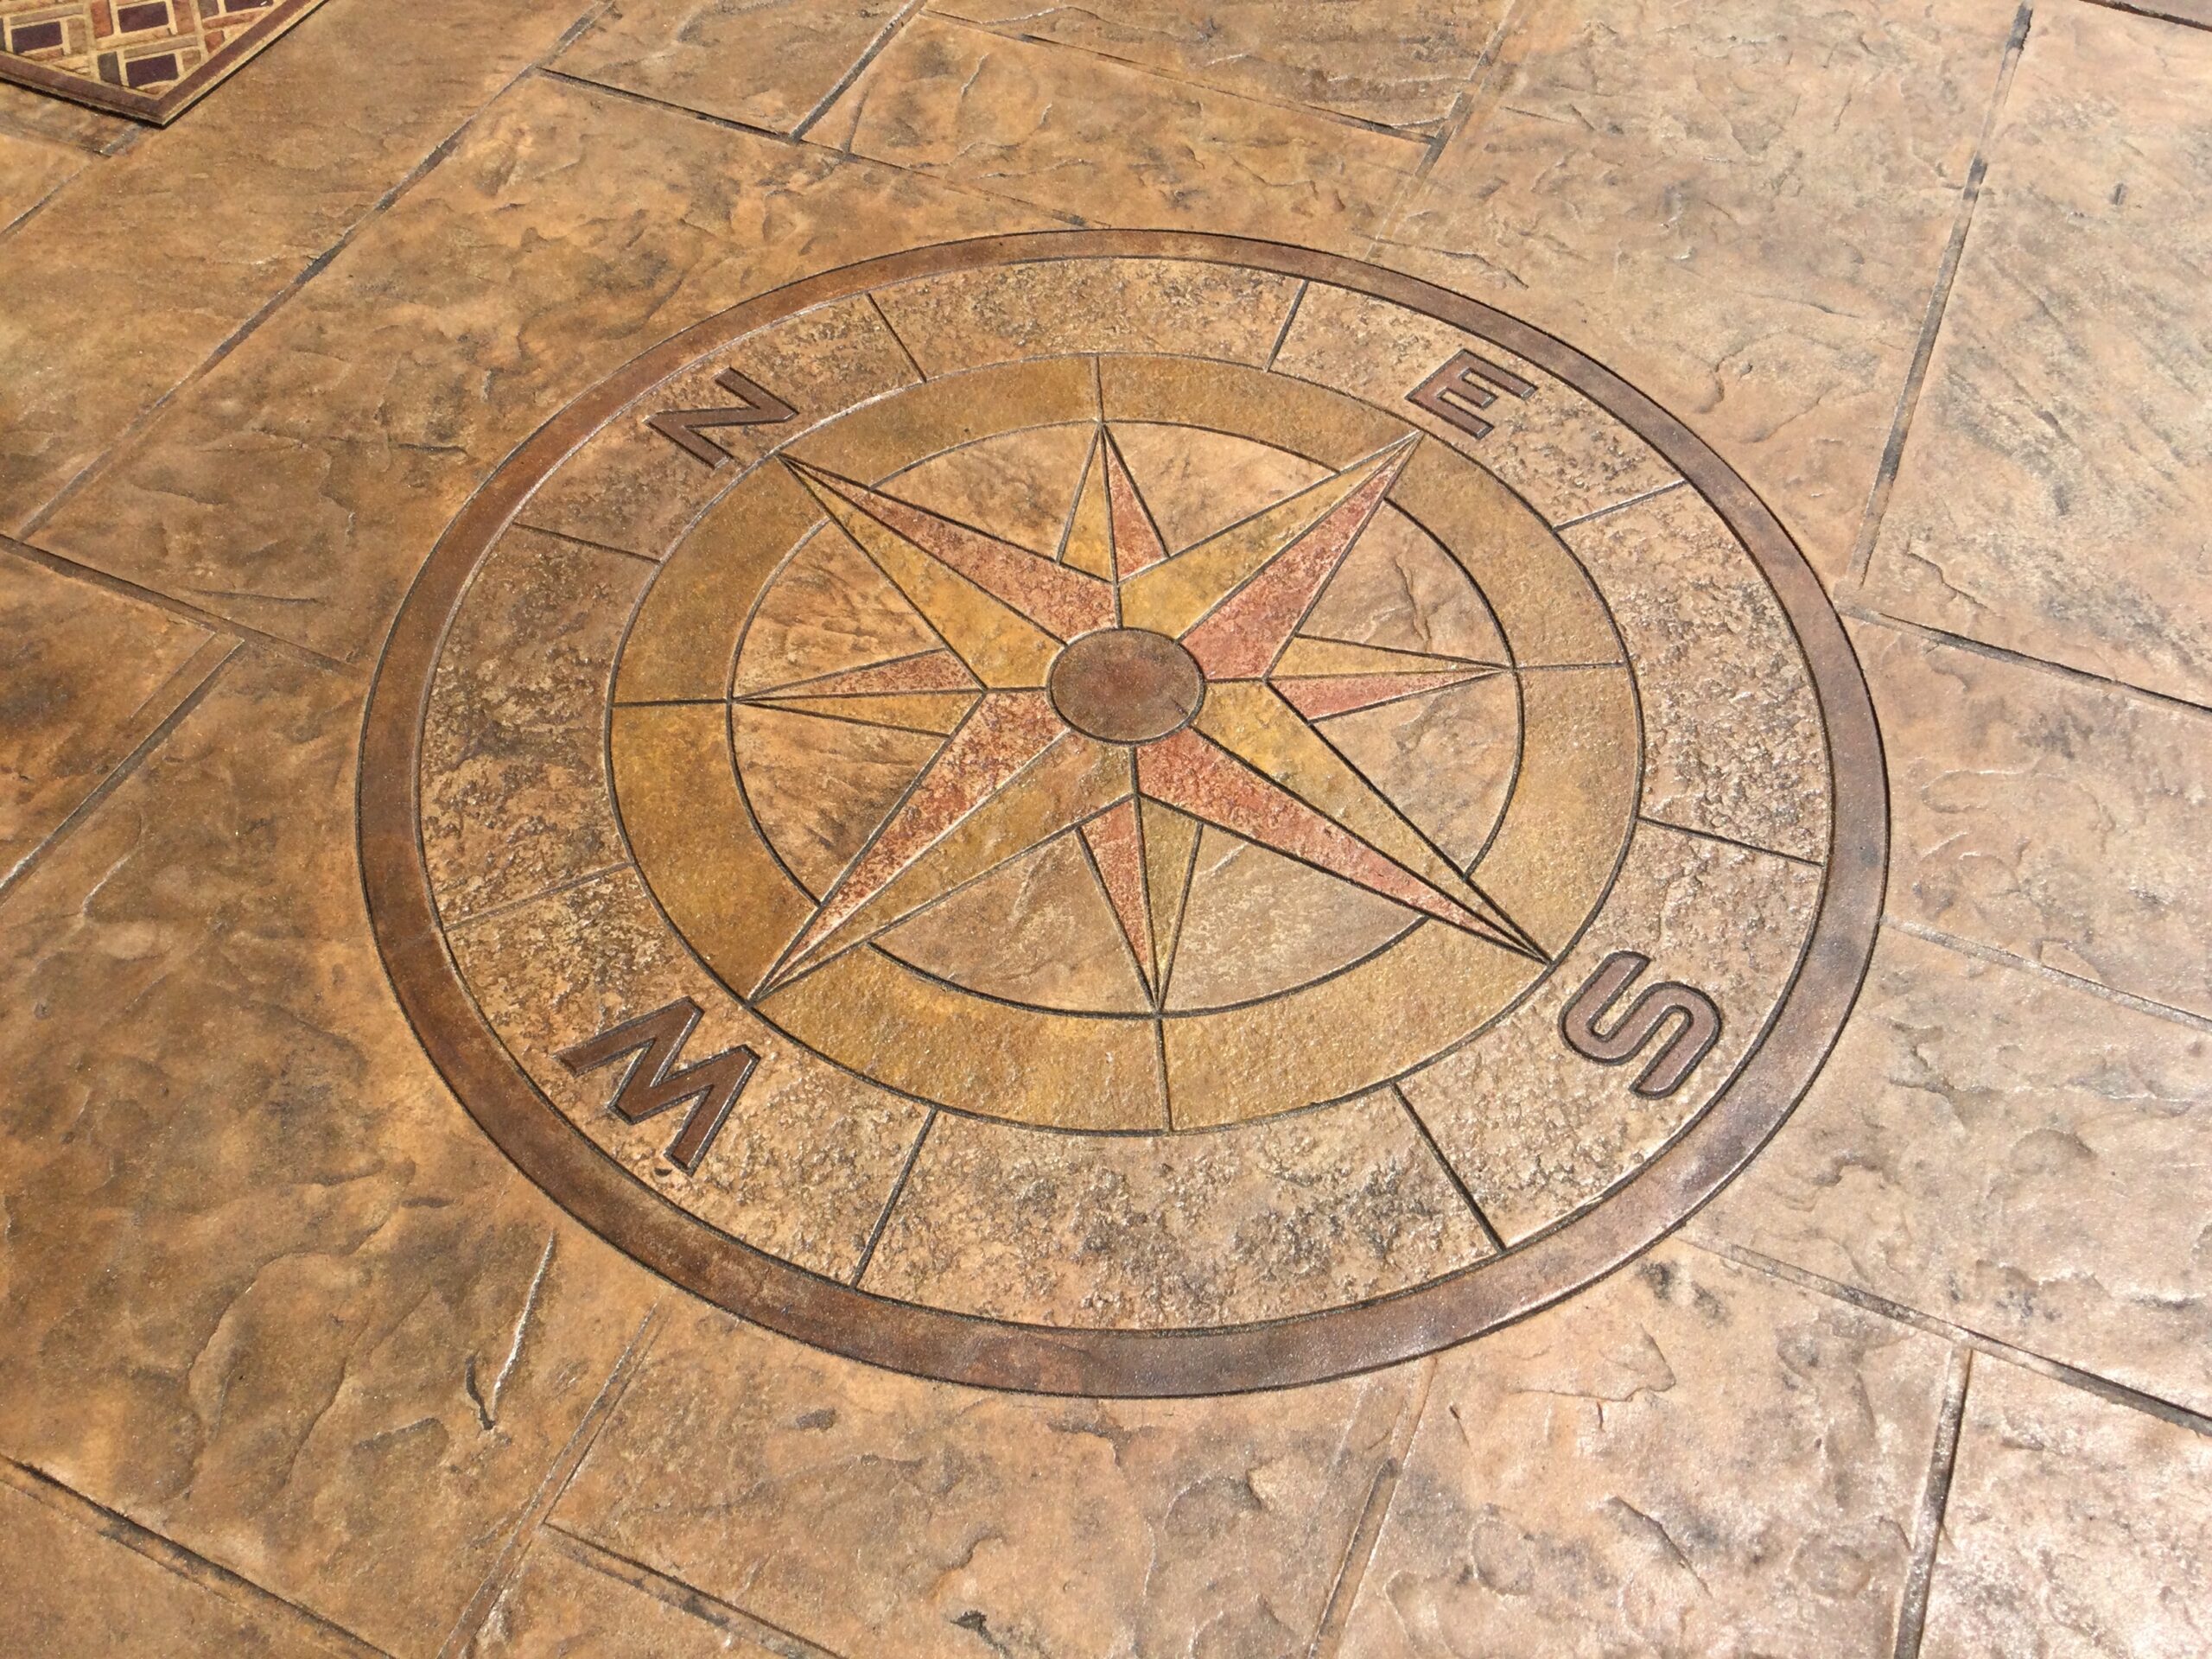 The freshly stained compass rose on the driveway, vivid and attractive with the new hues of Aztec Brown, Crimson, Wheat, and Black